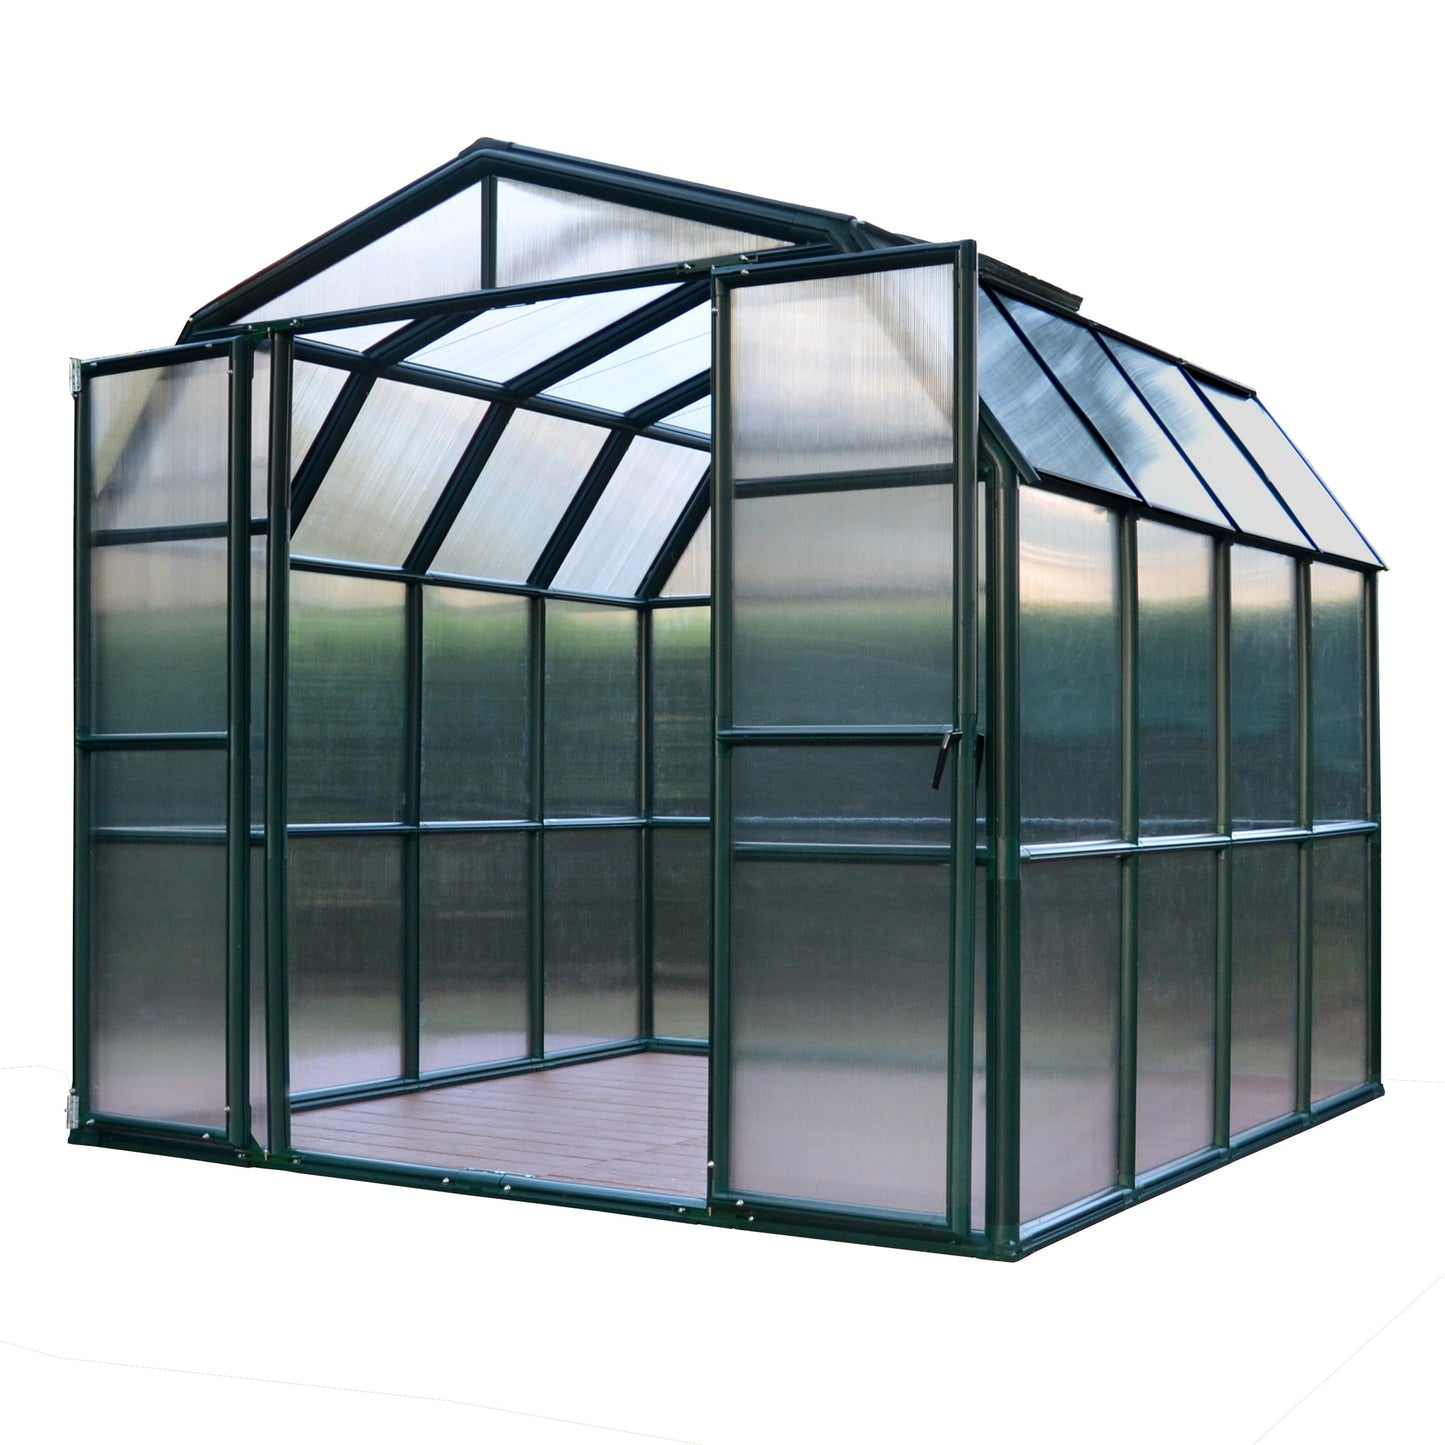 Rion Grand Gardener 8' x 8' Greenhouse - Clear